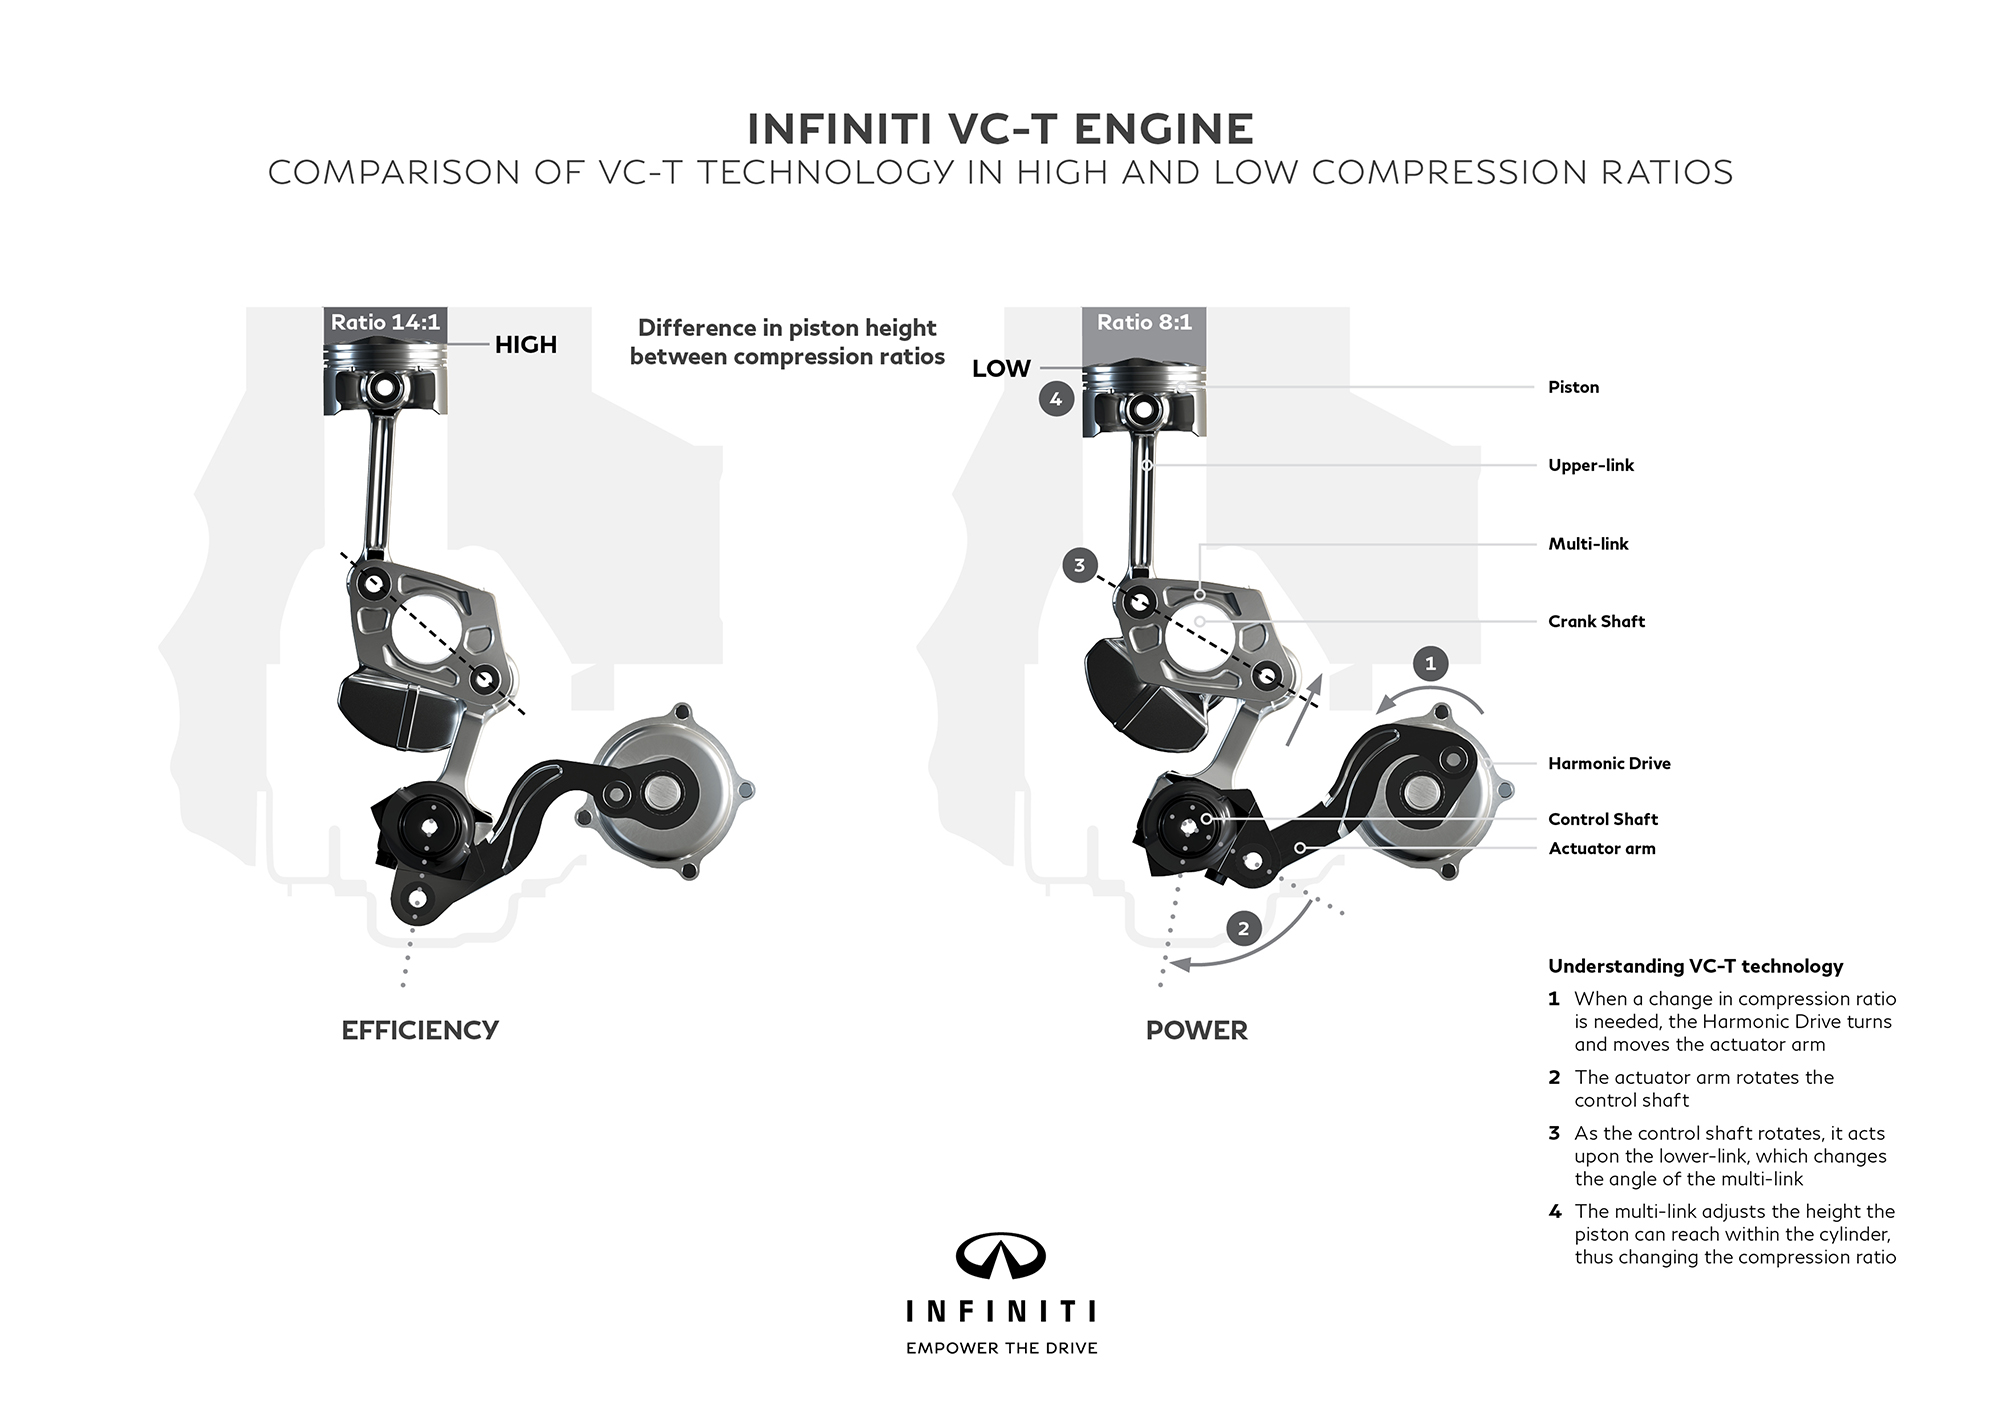 infiniti variable compression ratio vc-t explained